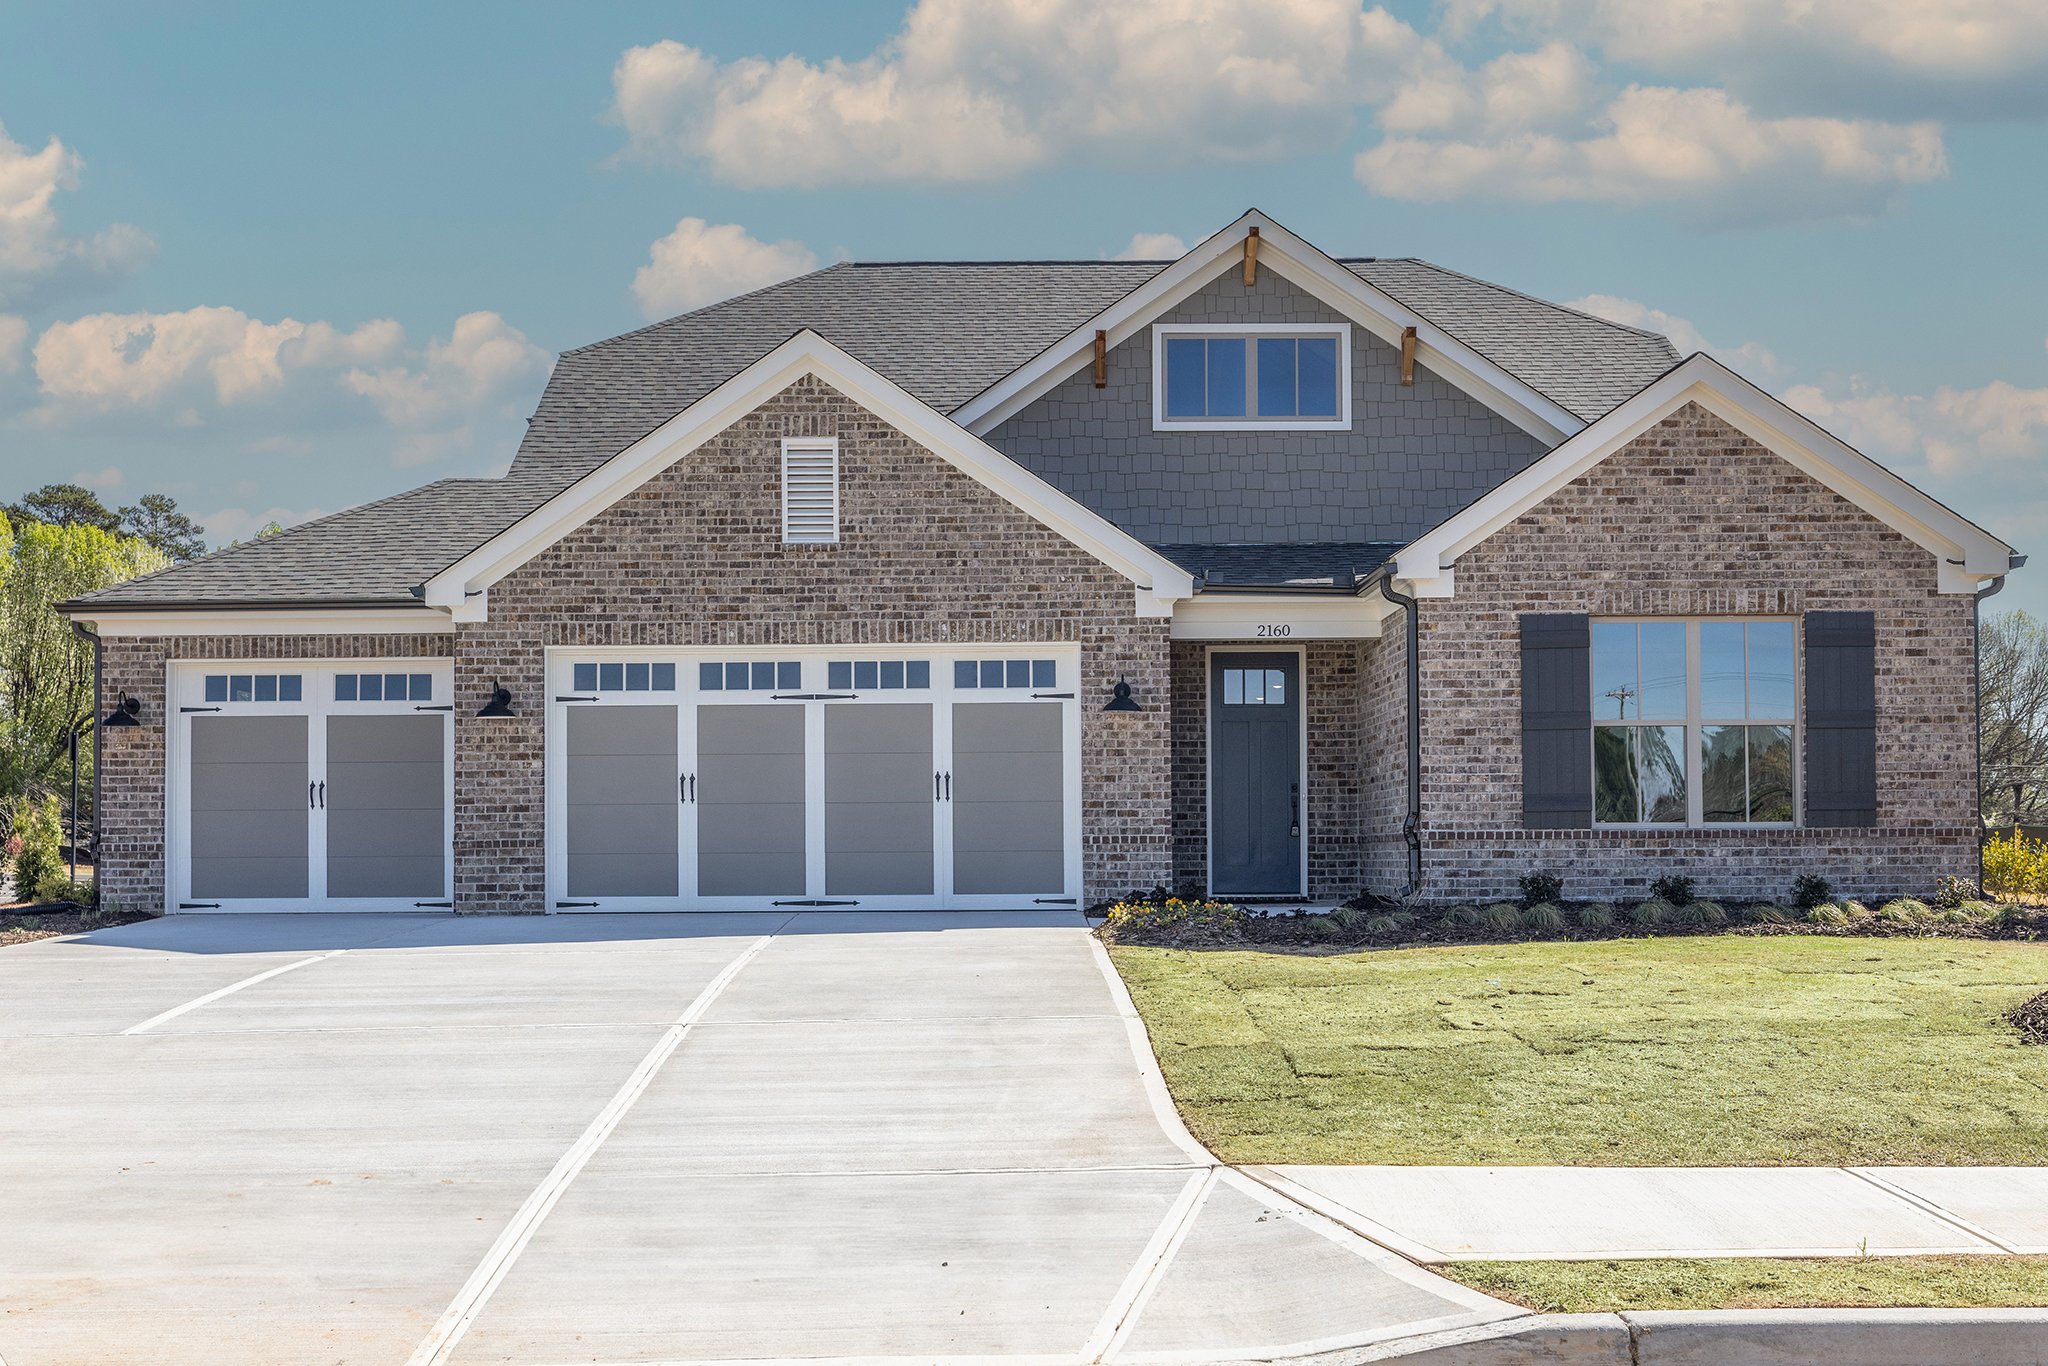 002-Front Exterior with 3rd Car Garage.jpg